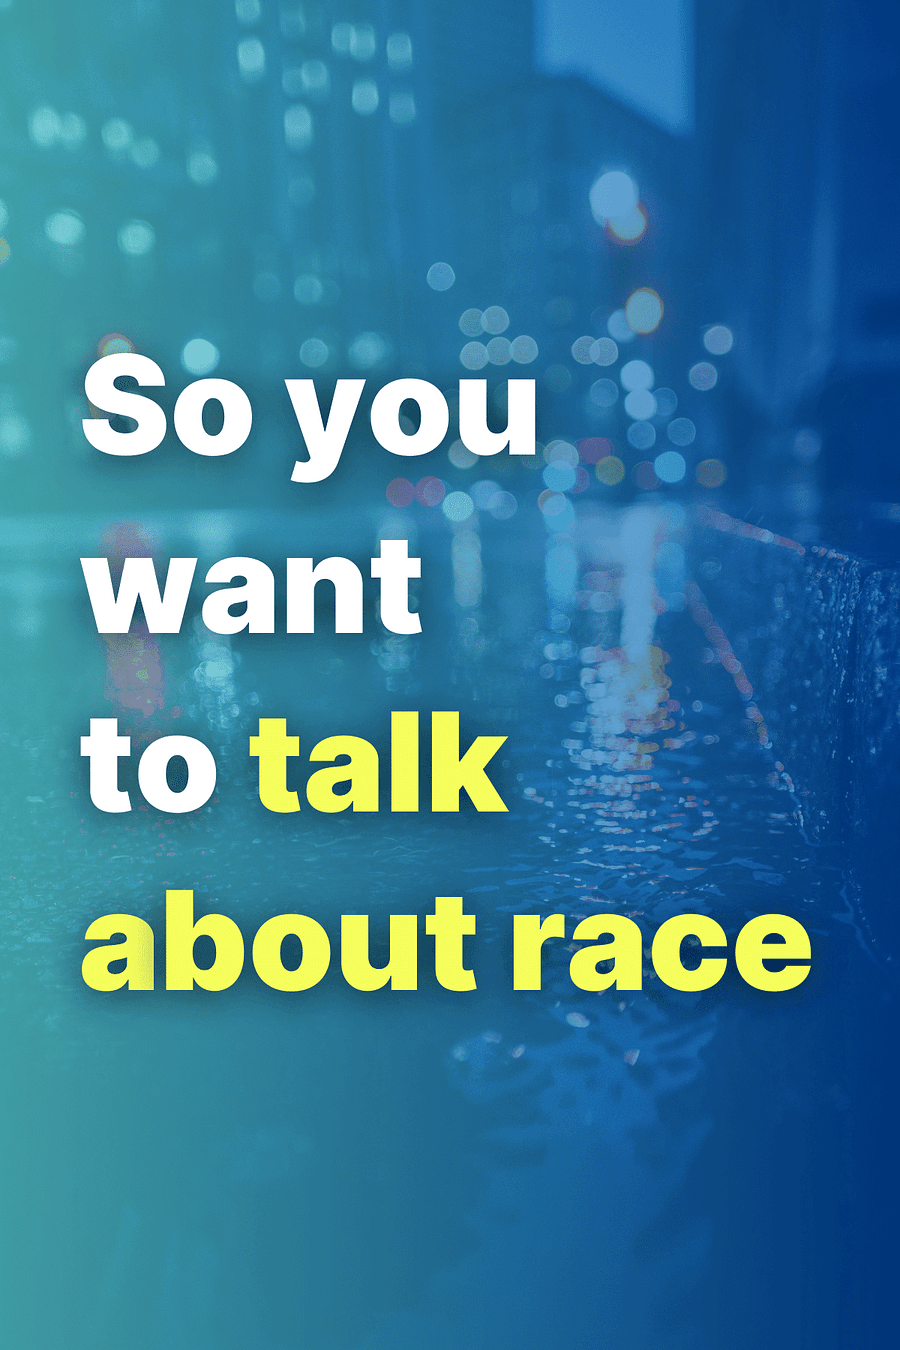 So You Want to Talk About Race by Ijeoma Oluo - Book Summary